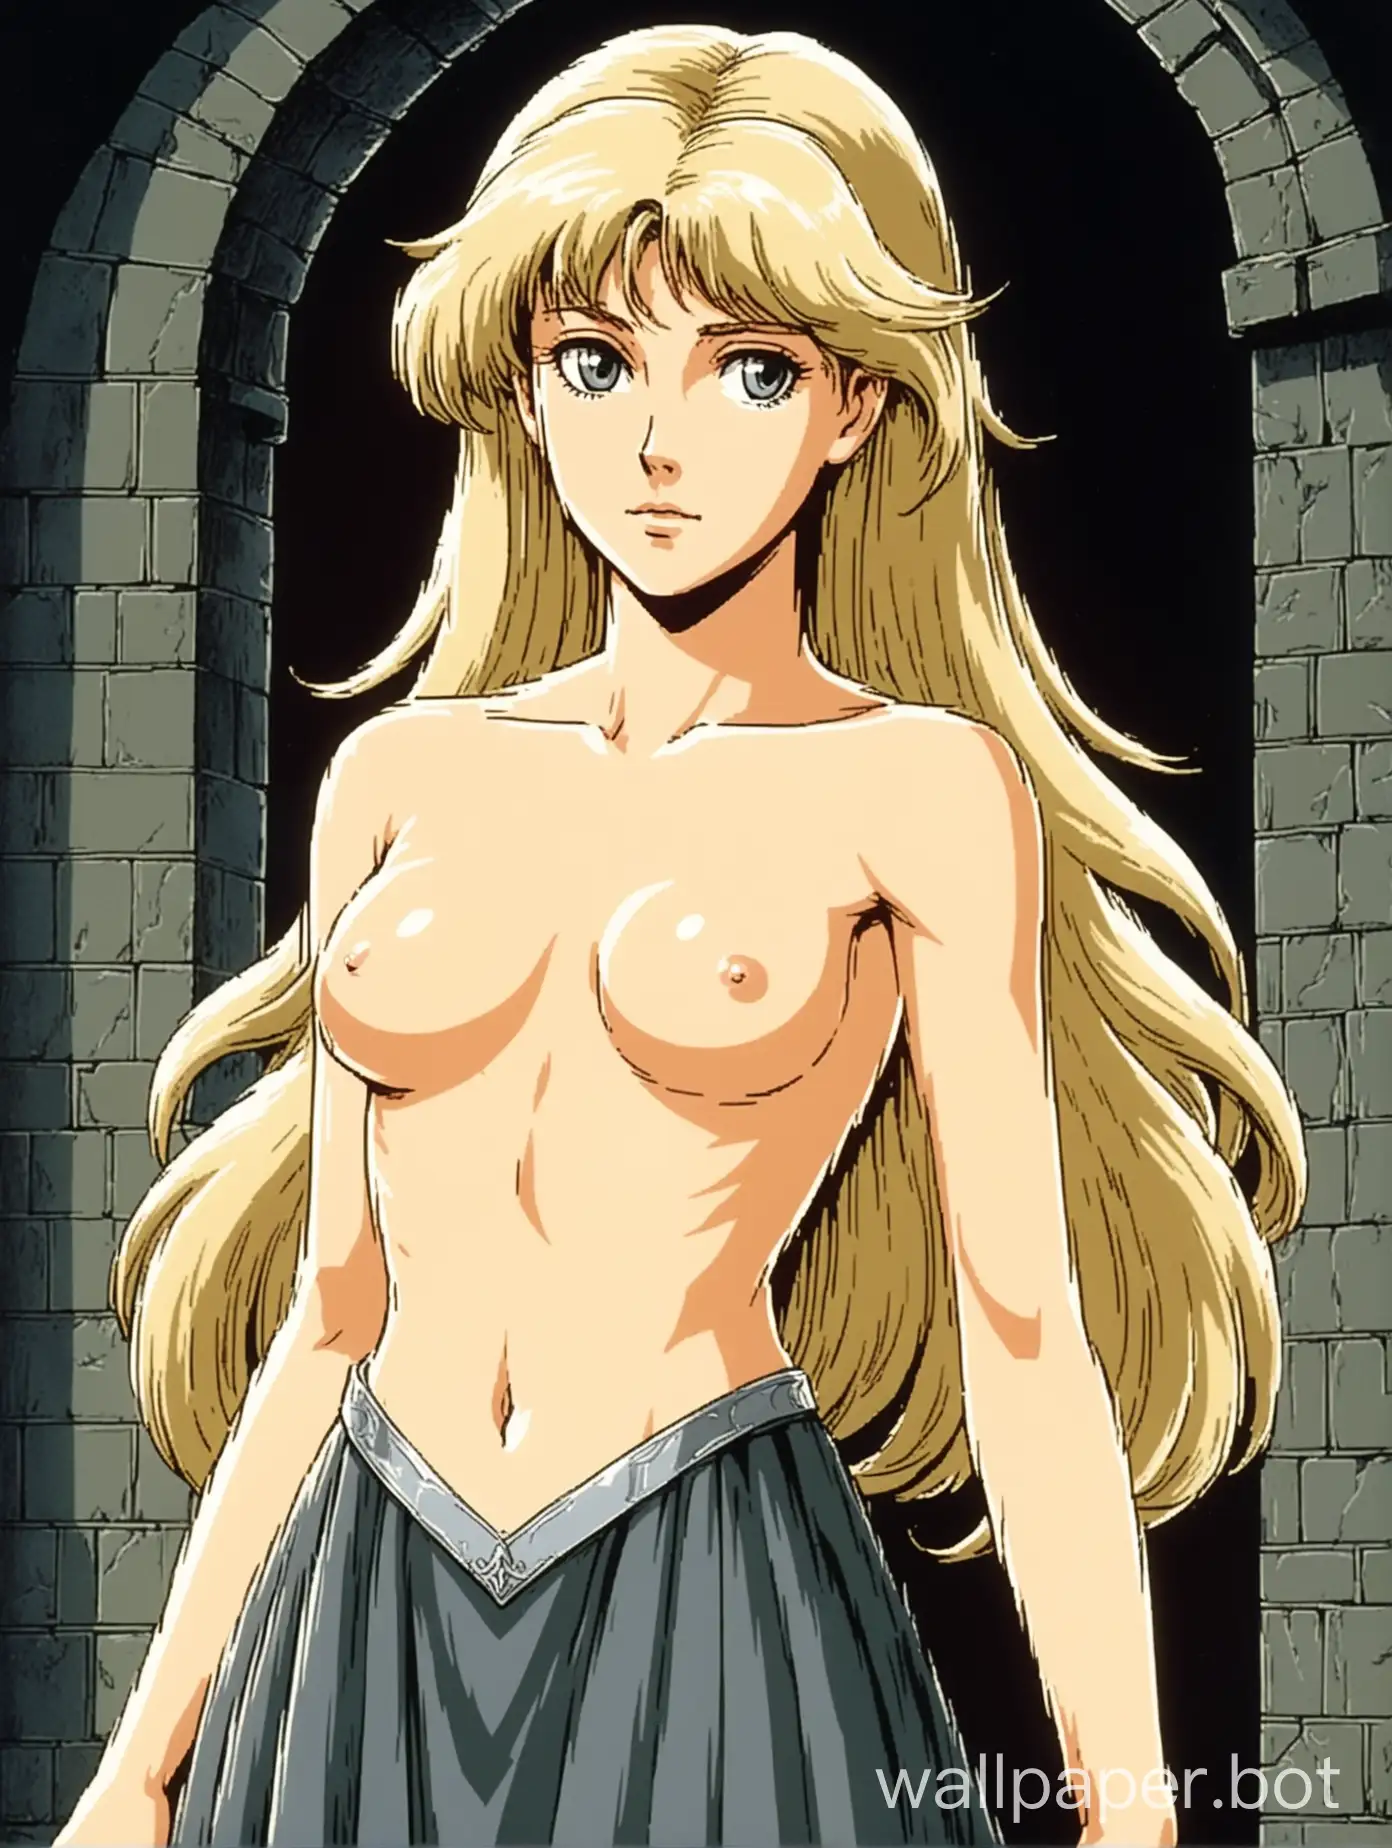 portrait of a young and attractive white woman without a shirt, exposed chest, appealing breasts, thin sharp face, she has long wavy white-blonde hair, standing proudly, elegant and slender, wearing a transparent dark grey skirt, topless, medieval elegance, 1980s retro anime